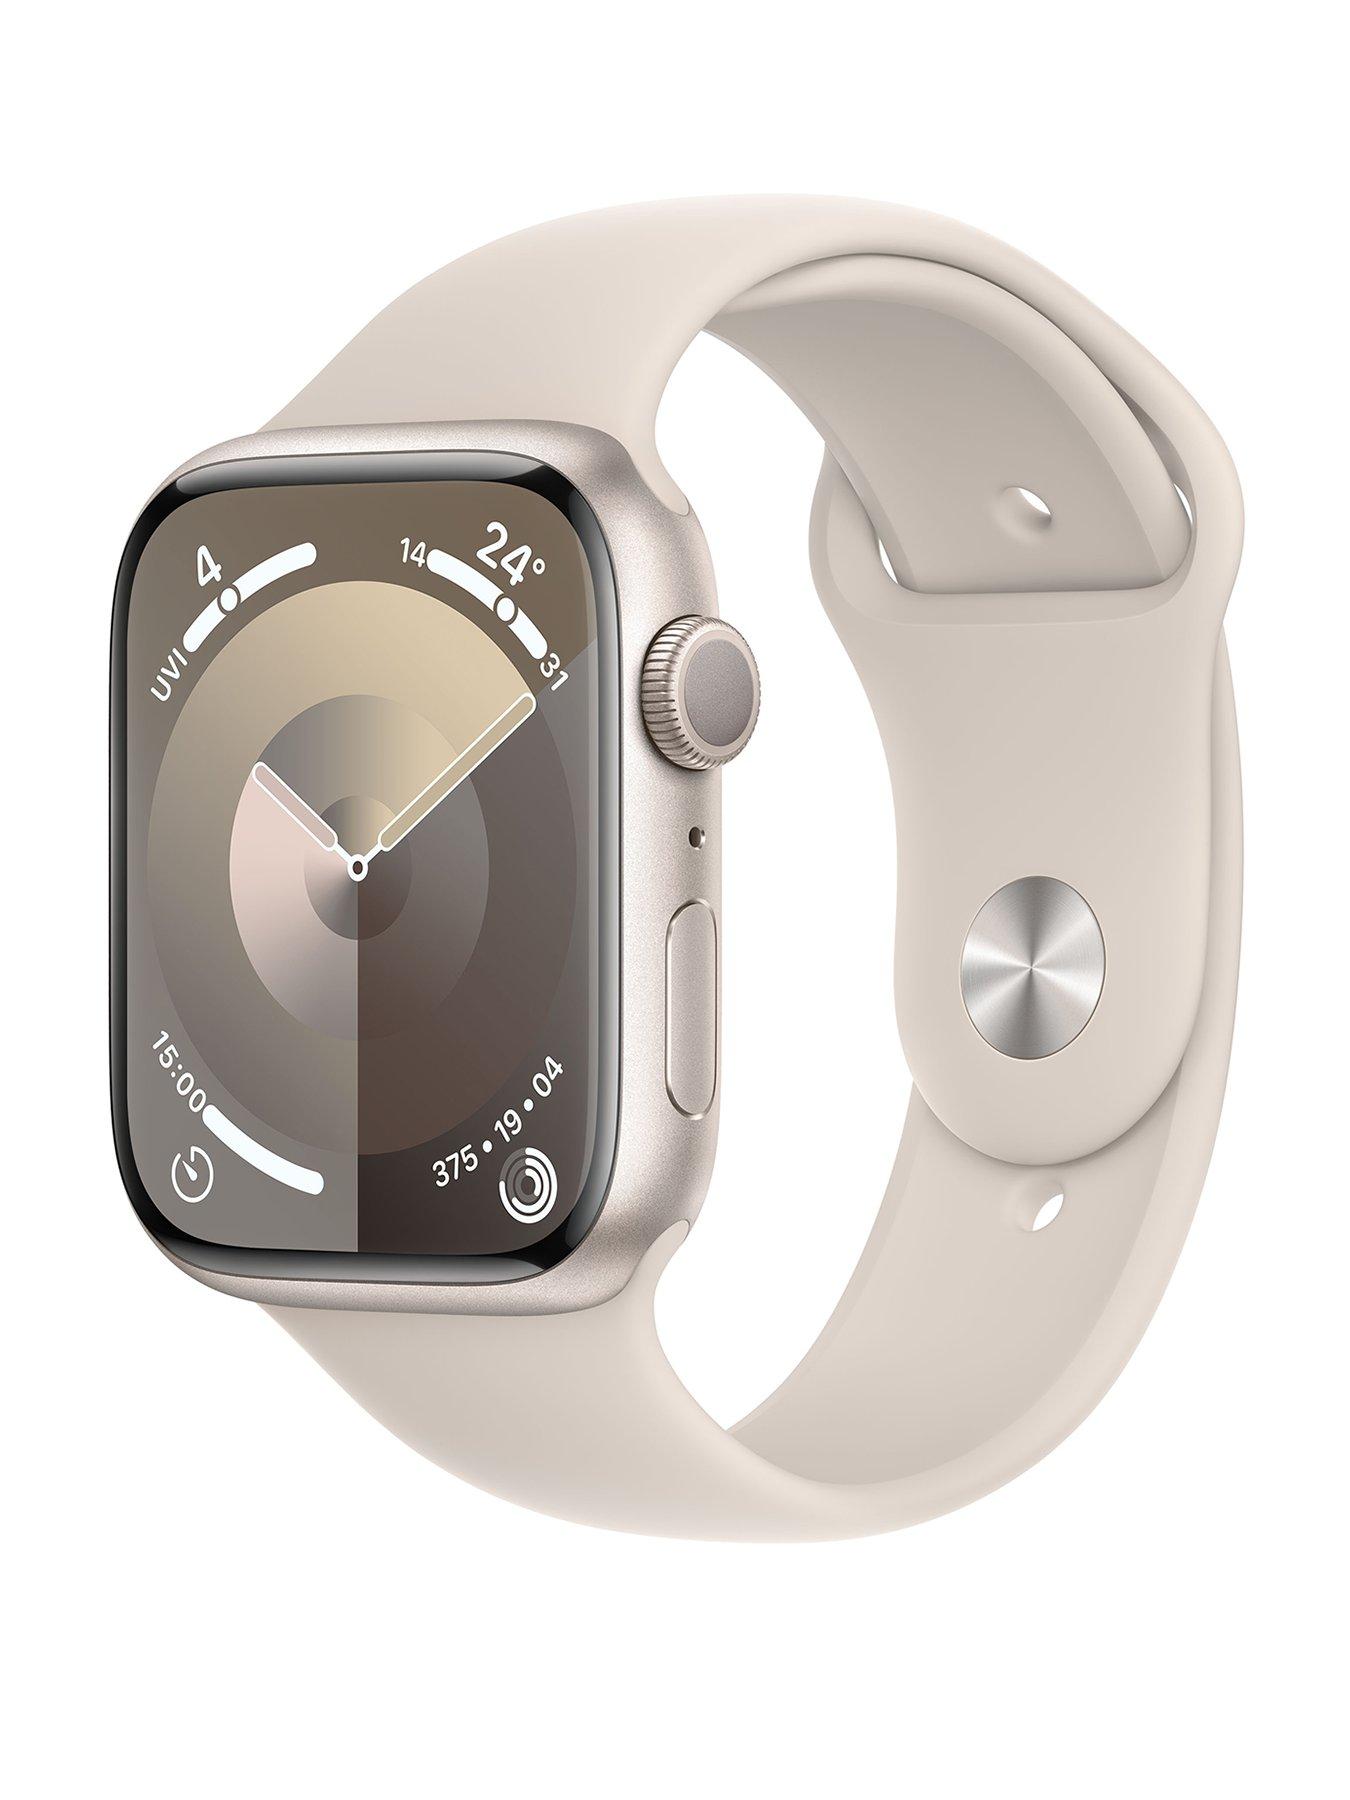 Electricals watch Apple |